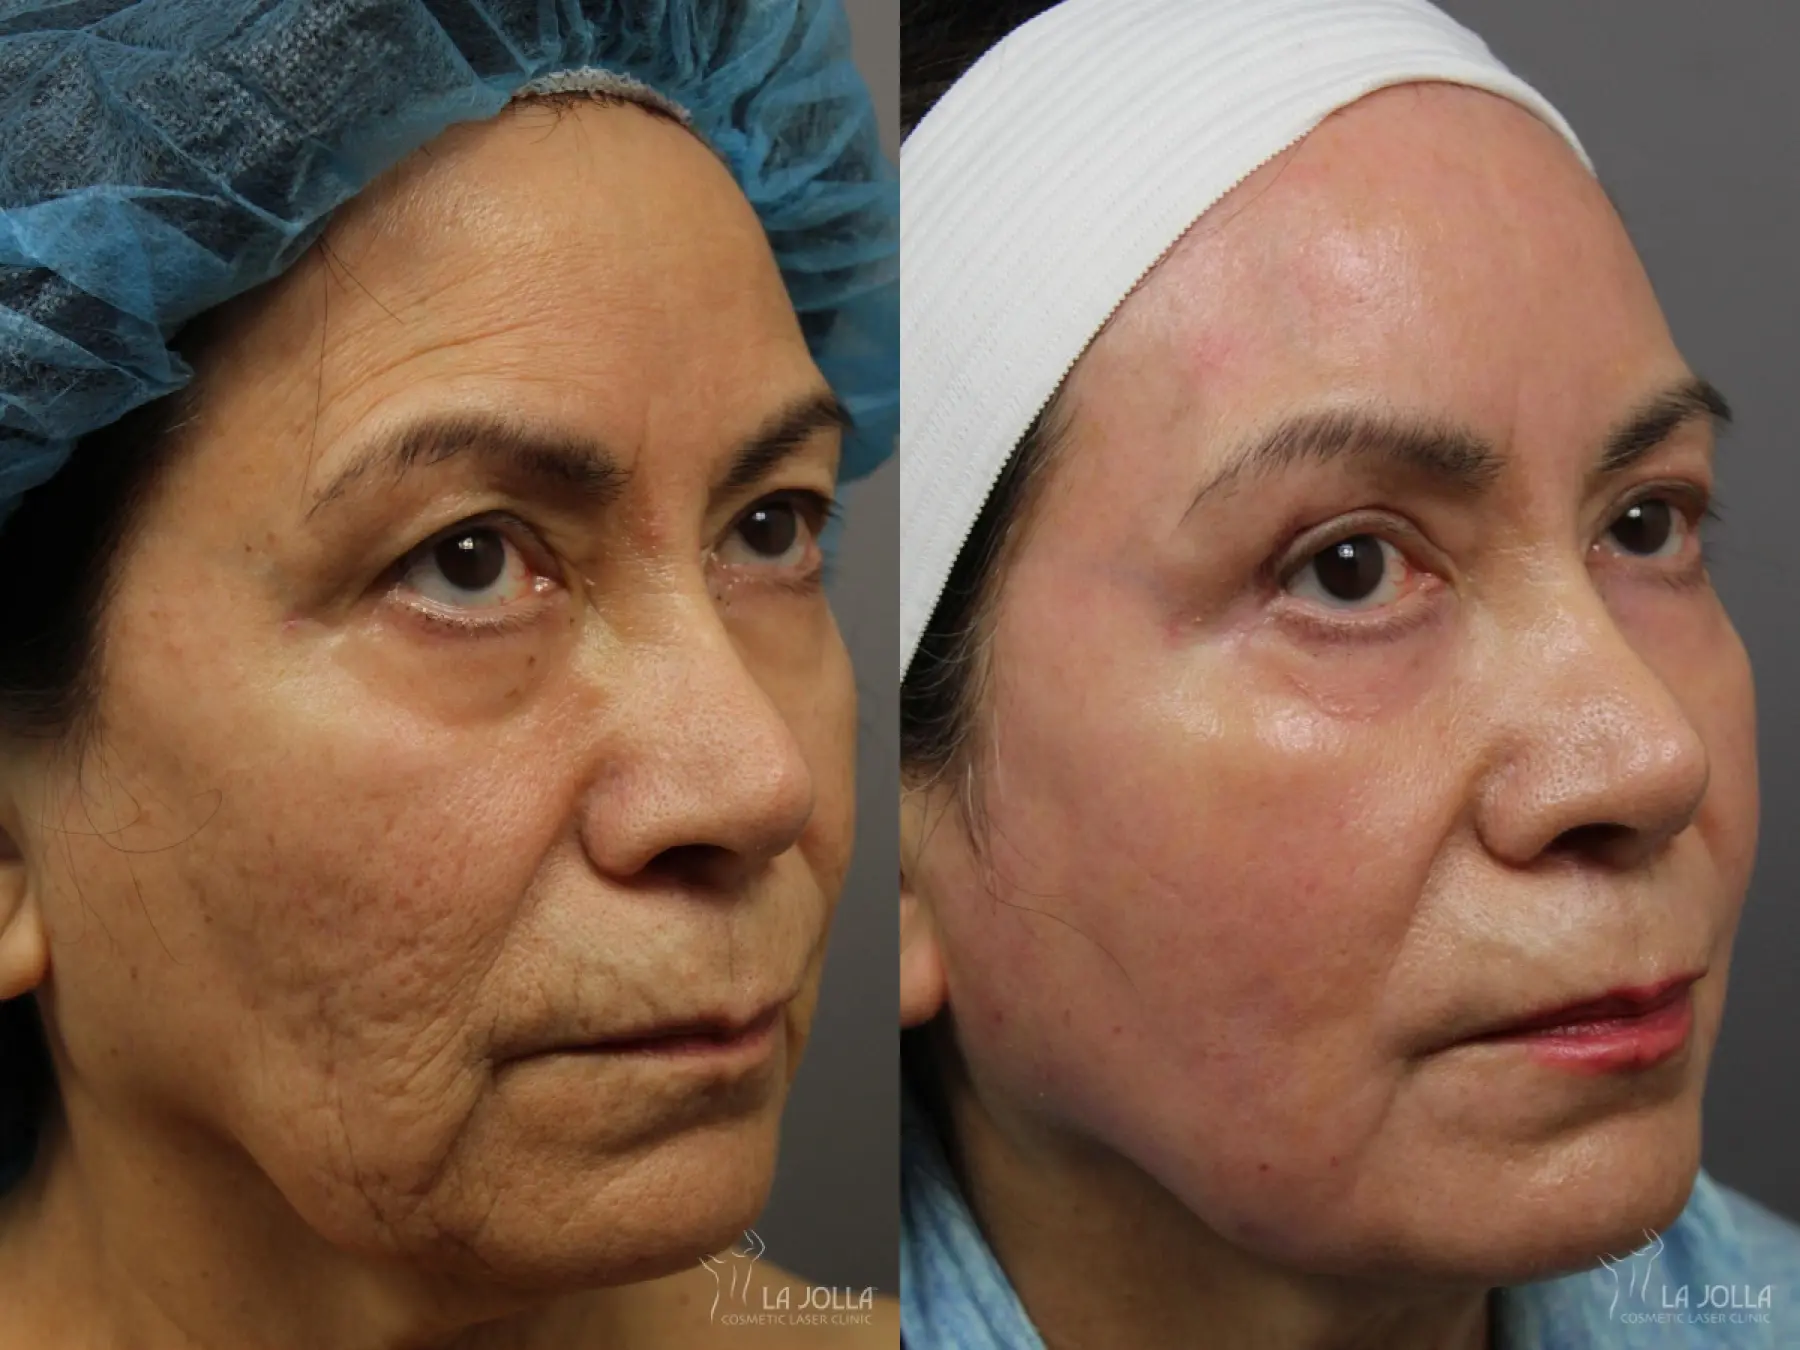 CO2 Laser: Patient 1 - Before and After 1